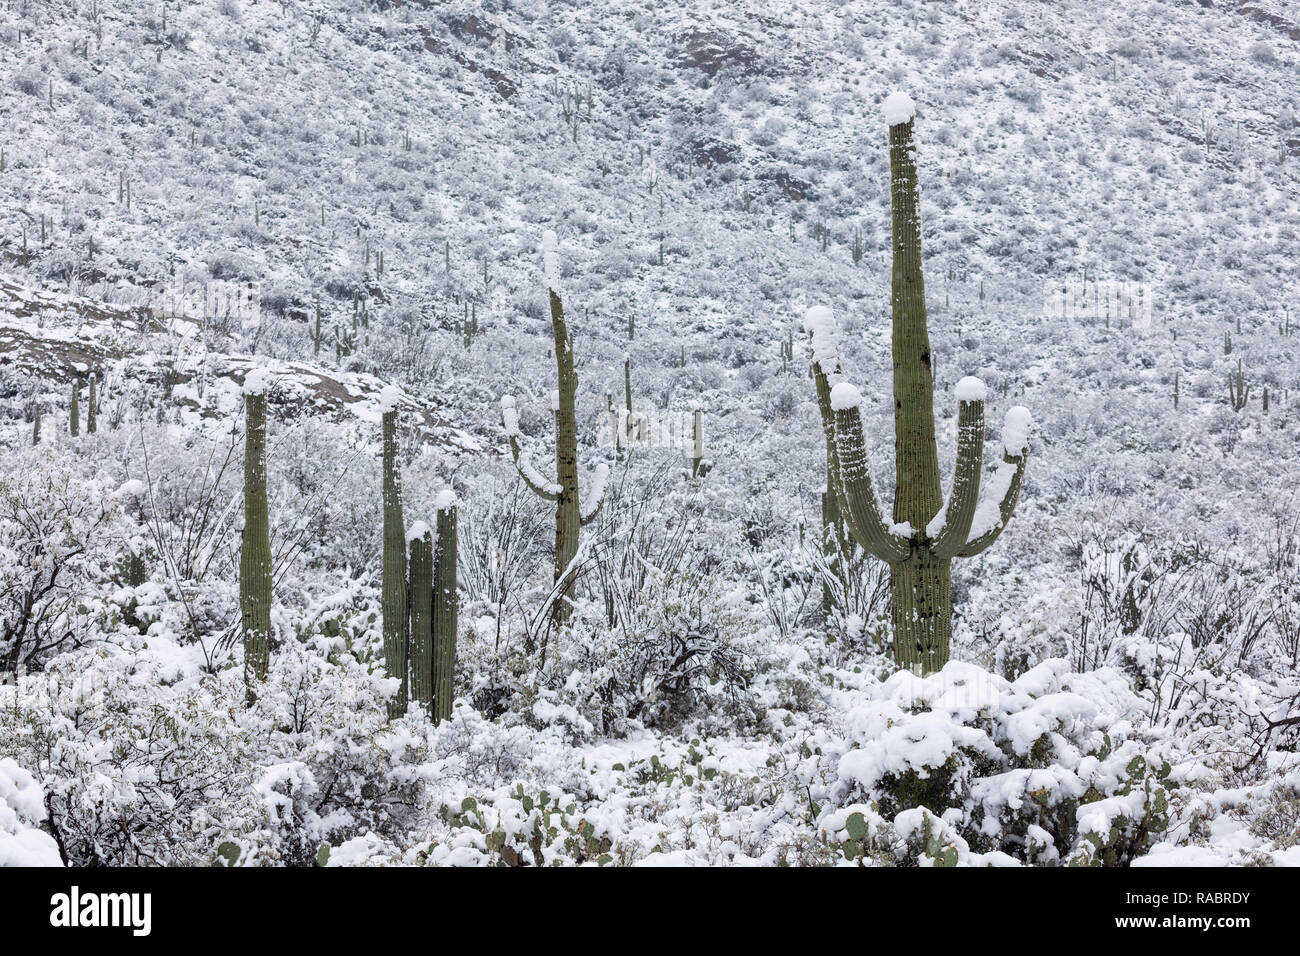 A cold winter storm brought a rare snowfall to Saguaro cactus in the  Sonoran Desert at Saguaro National Park in Tucson, USA Stock Photo - Alamy